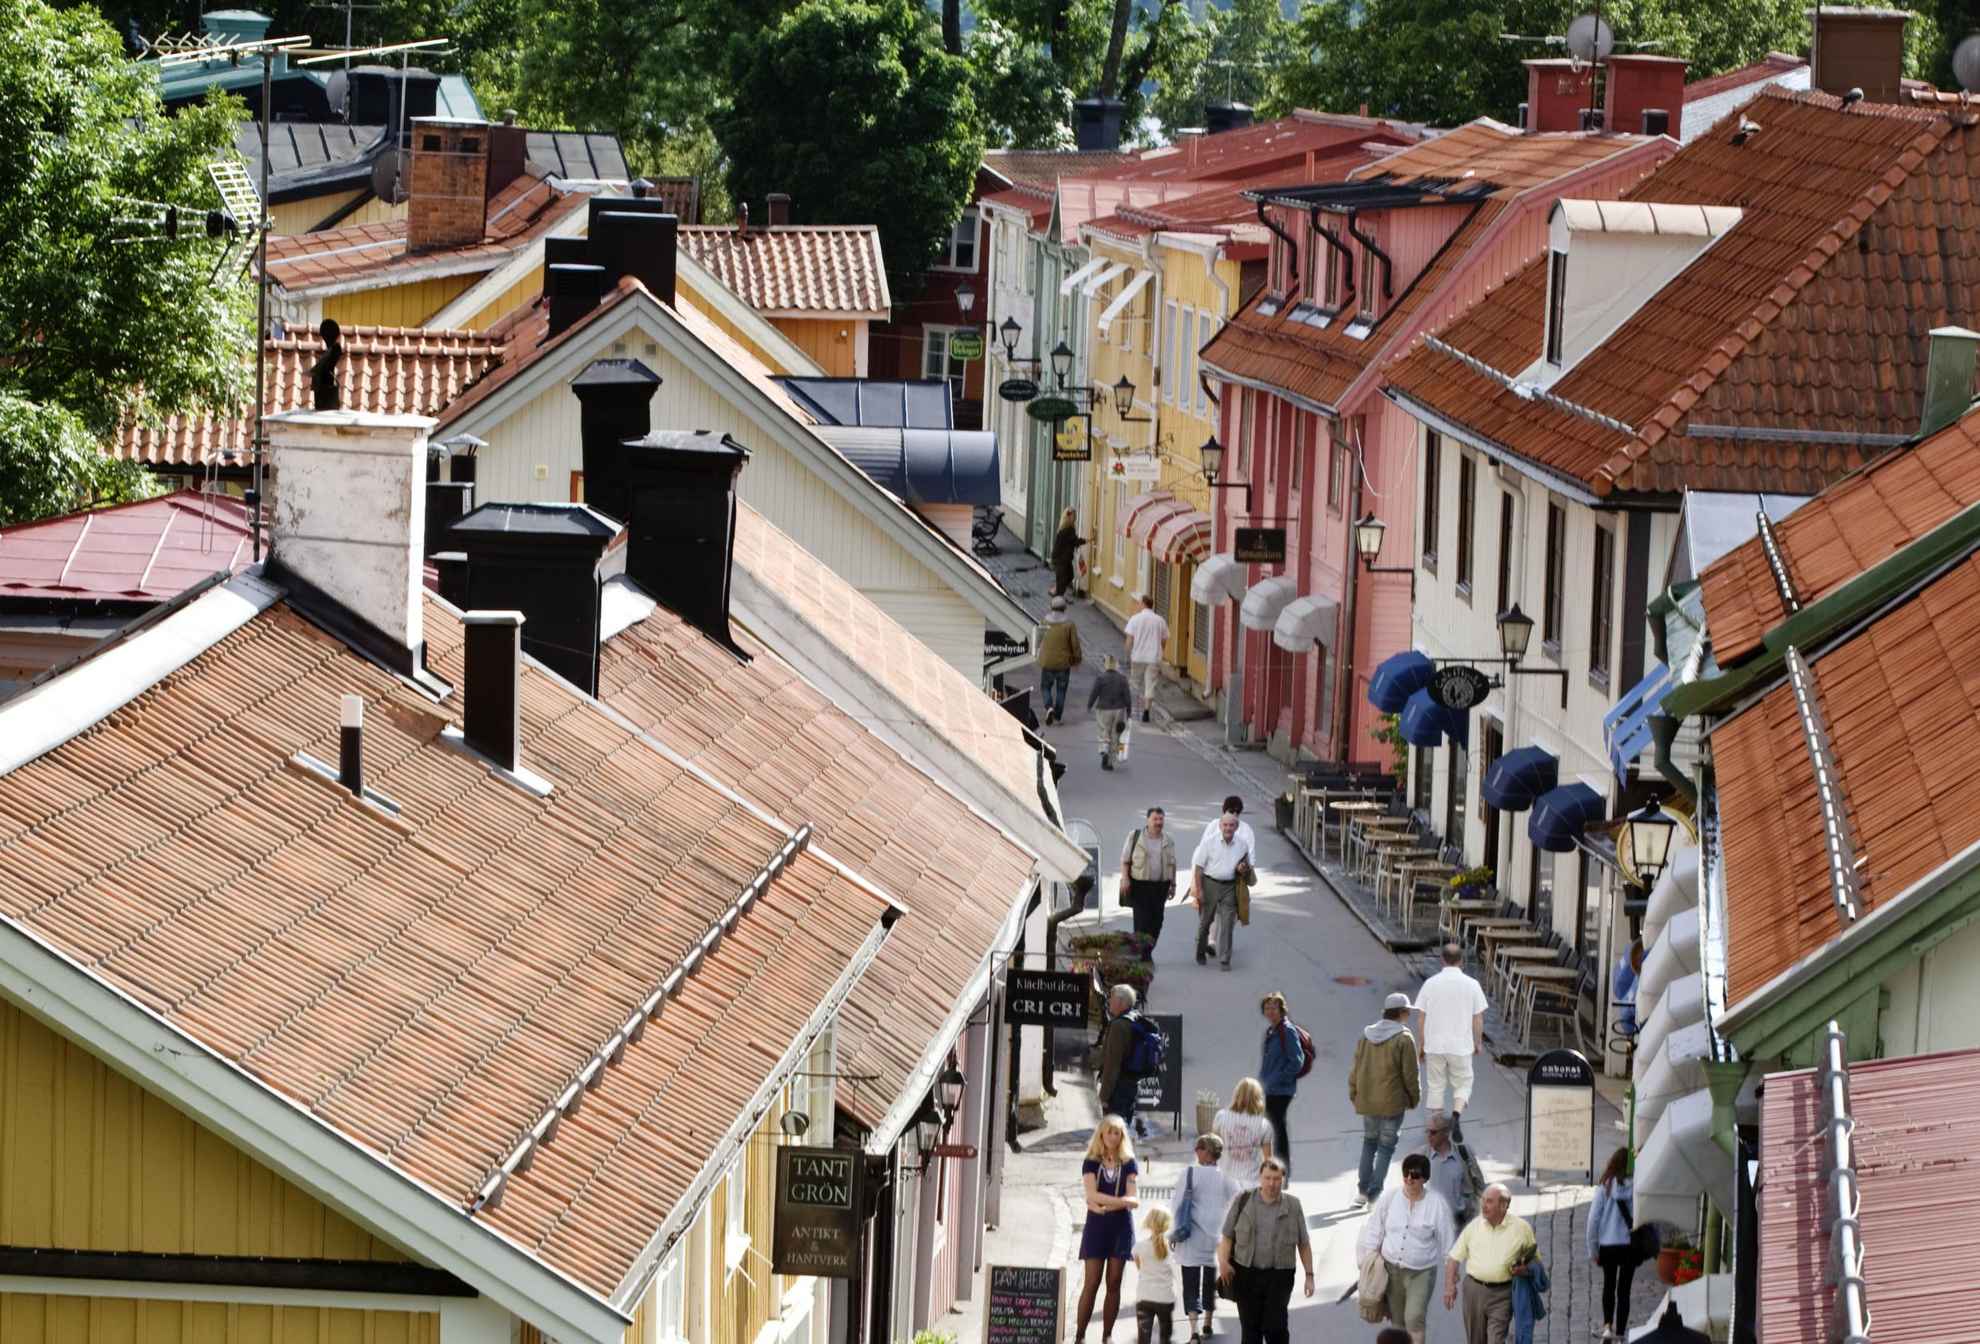 Wooden houses in different colours on a narrow street in Sigtuna, people walking on the street.